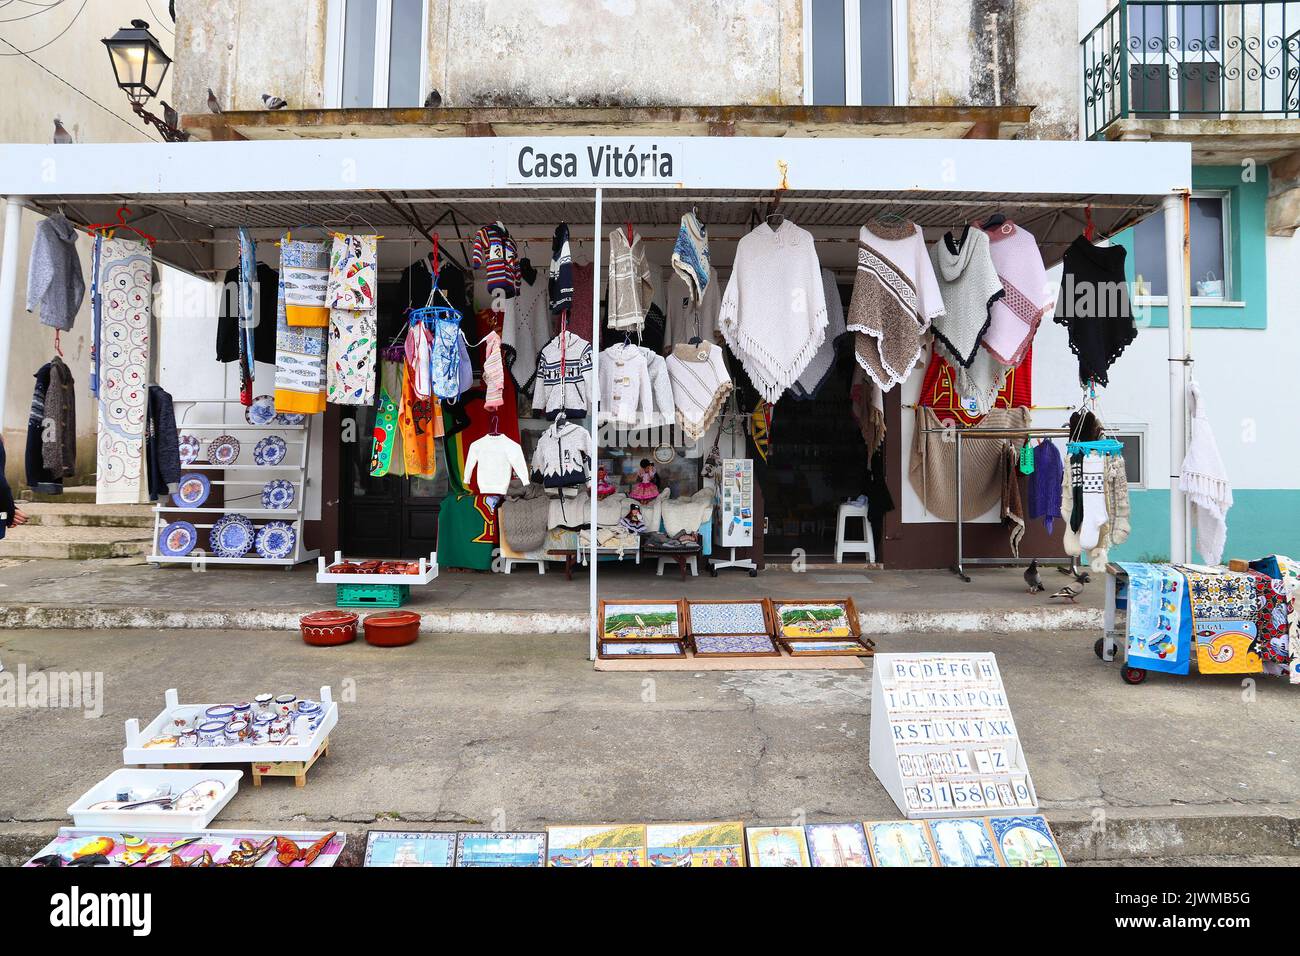 NAZARE, PORTUGAL - MAY 22, 2018: Local artisanal craft products and souvenirs in market stalls in Nazare, Portugal. Stock Photo